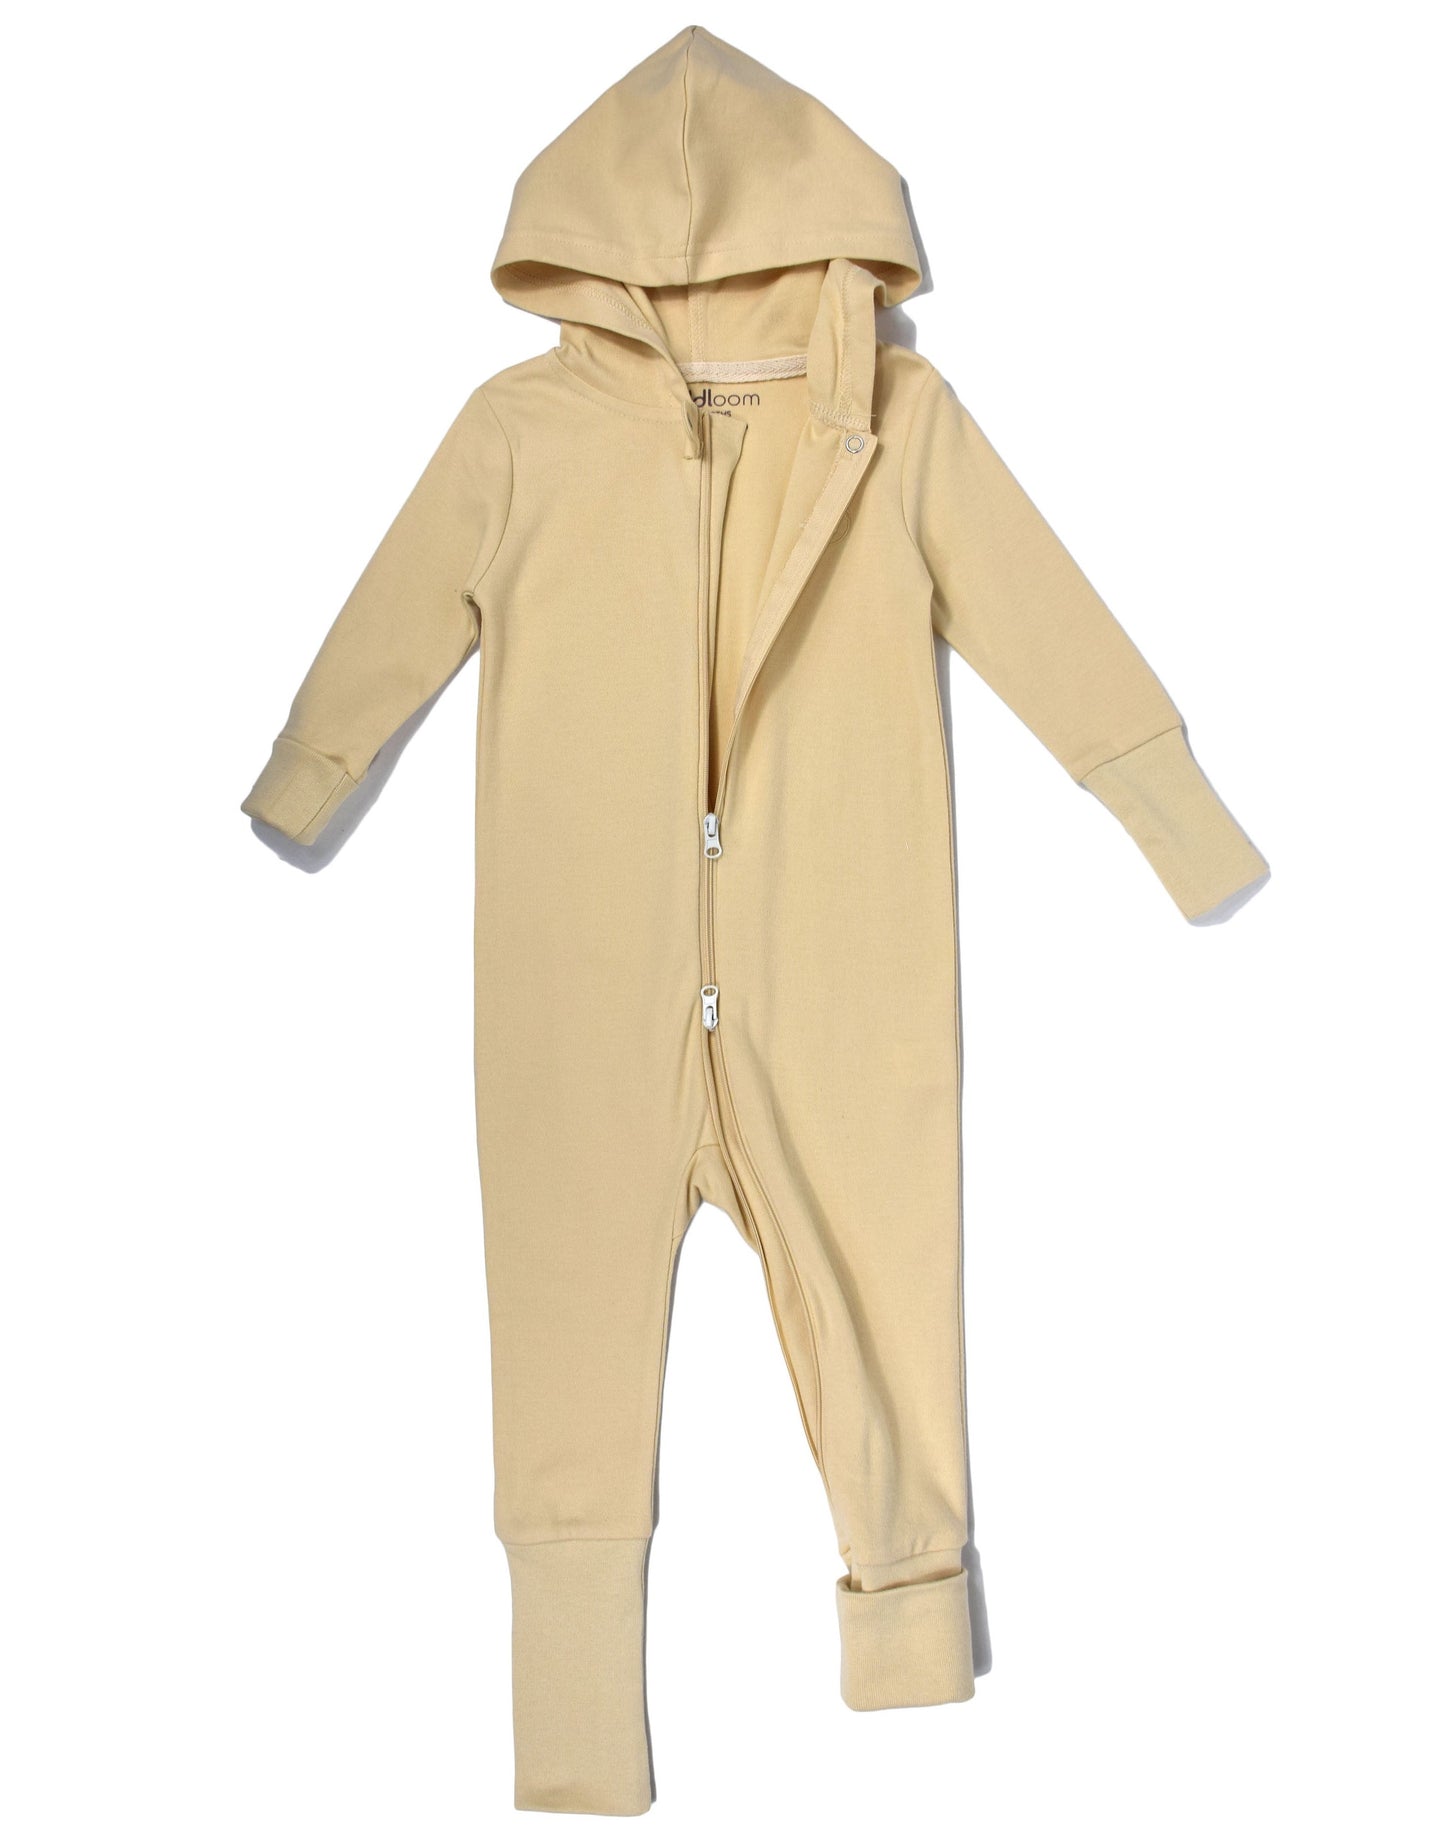 Grow-on Romper with Hood Online